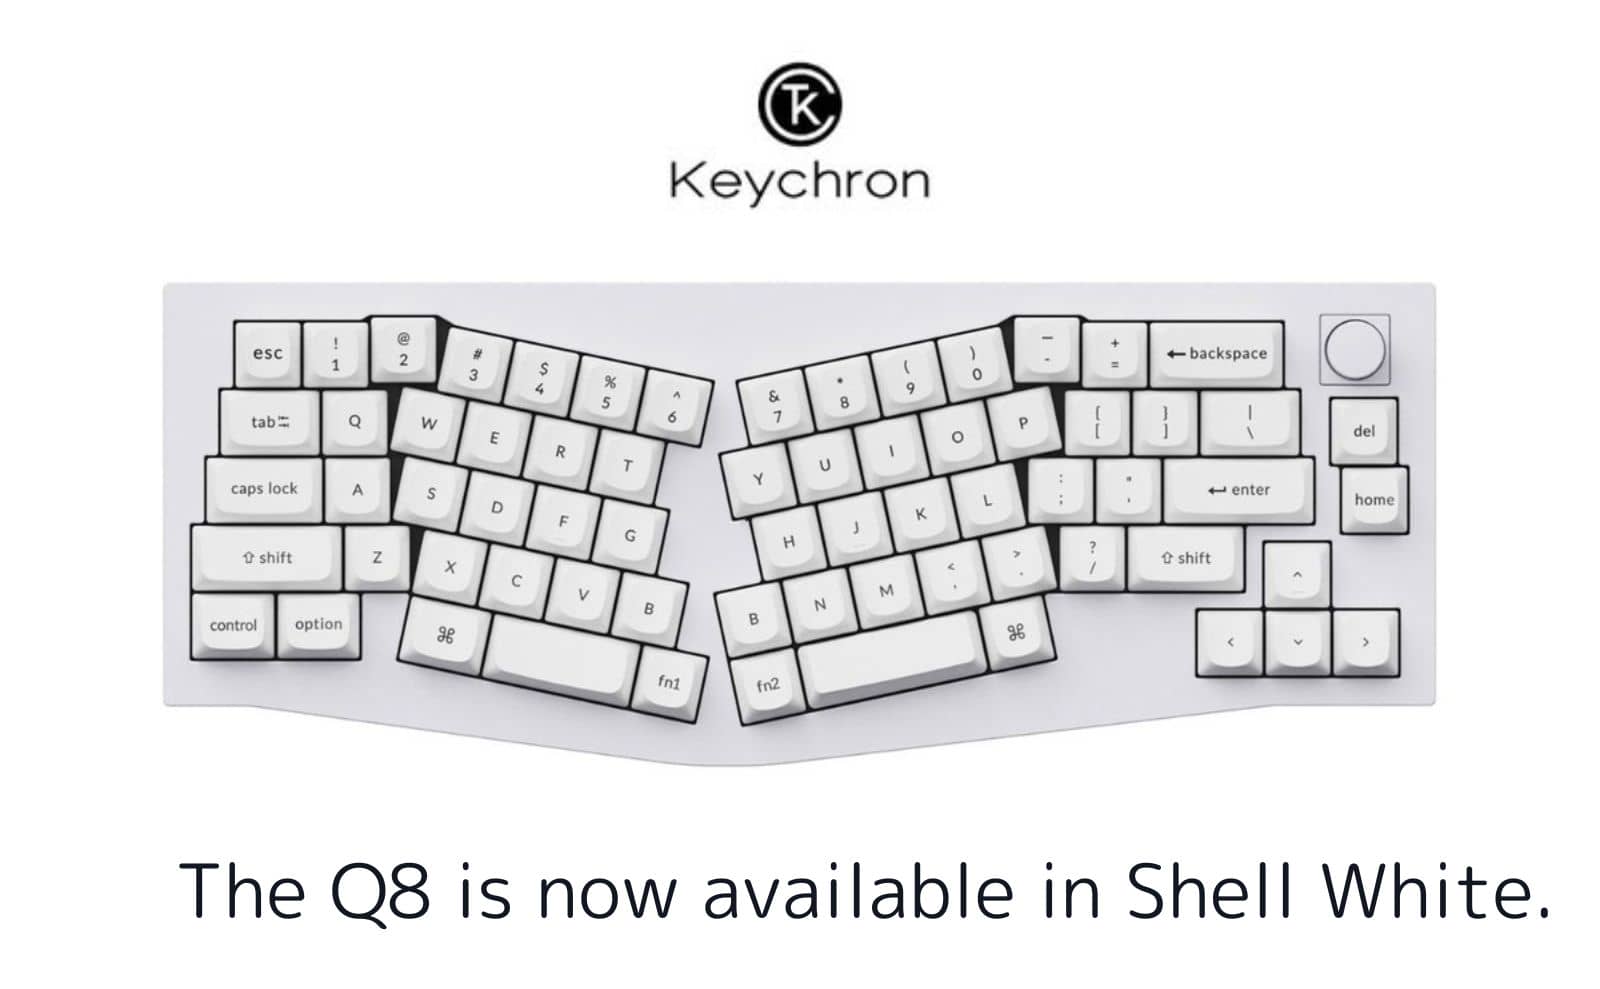 The Q8 is now available in Shell White.